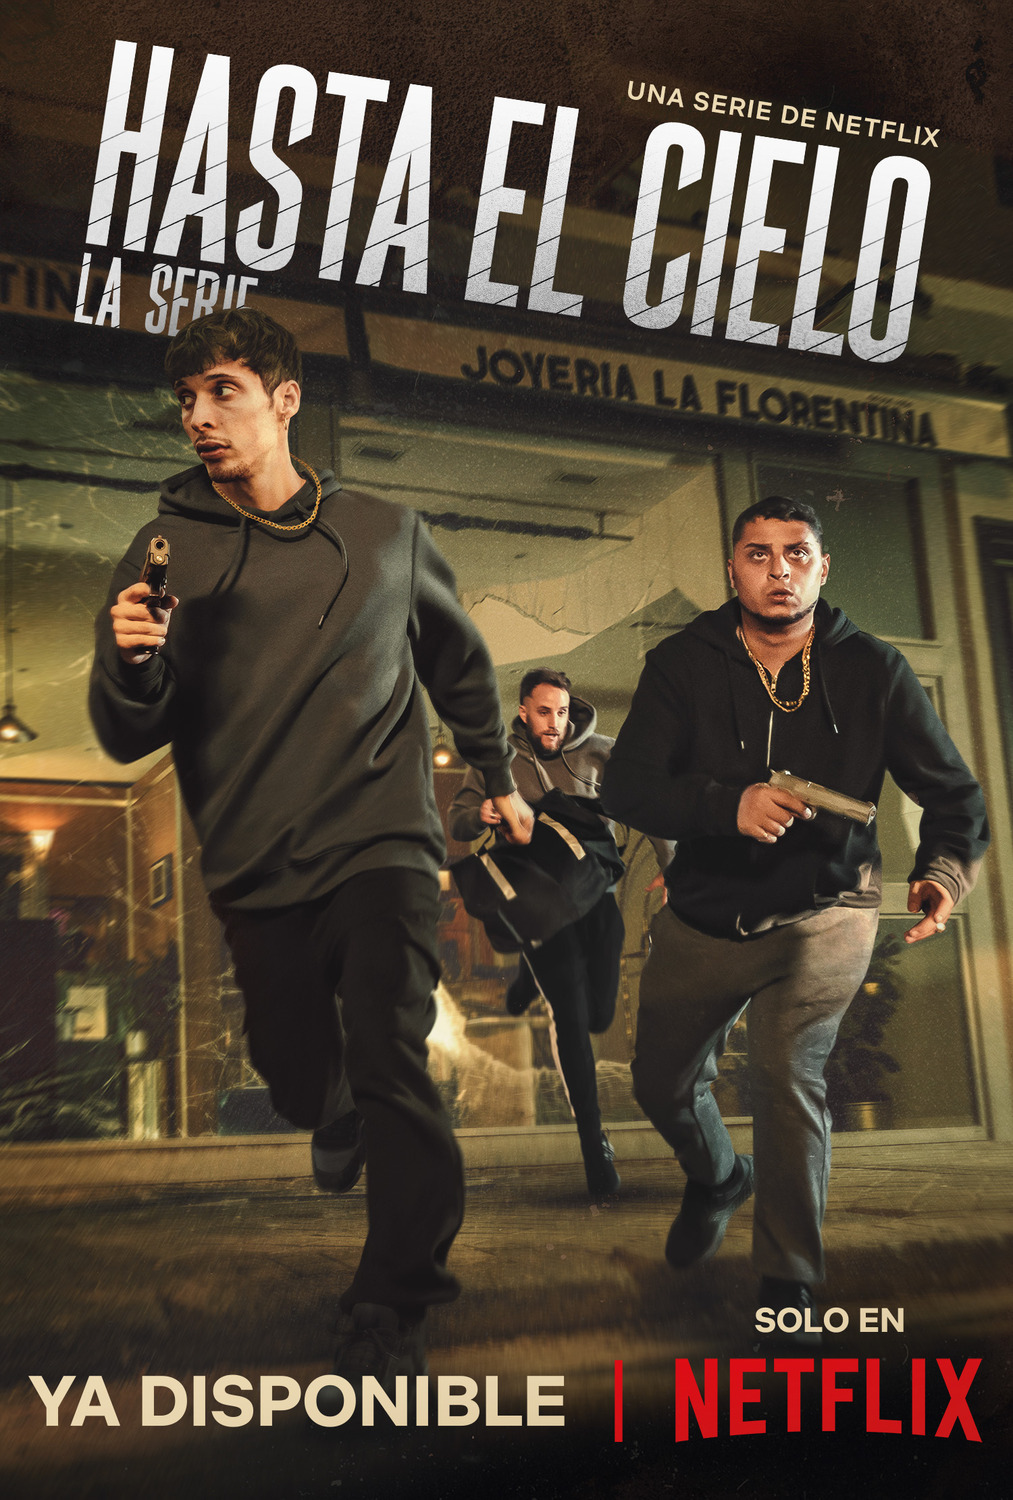 Extra Large TV Poster Image for Hasta el cielo: La serie (#7 of 7)